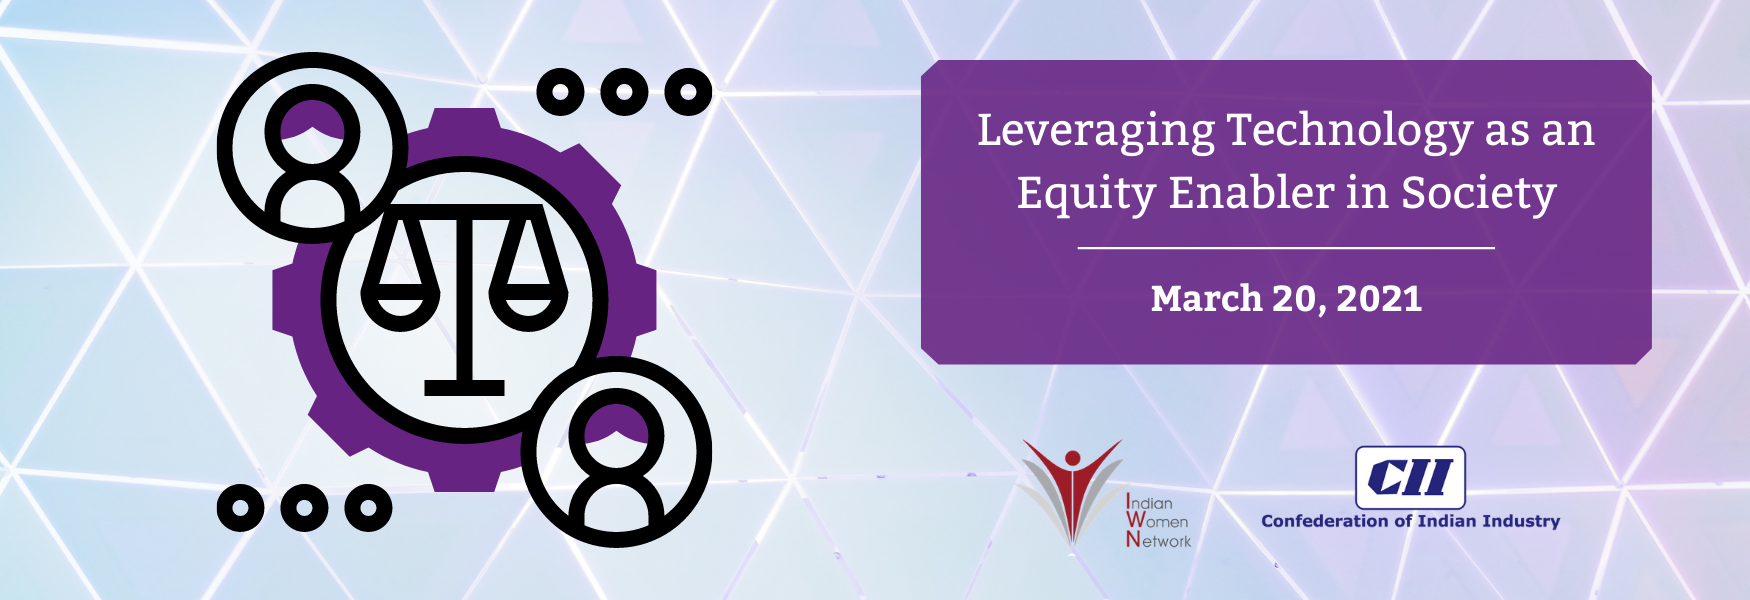 Leveraging Technology as an Equity Enabler in Society